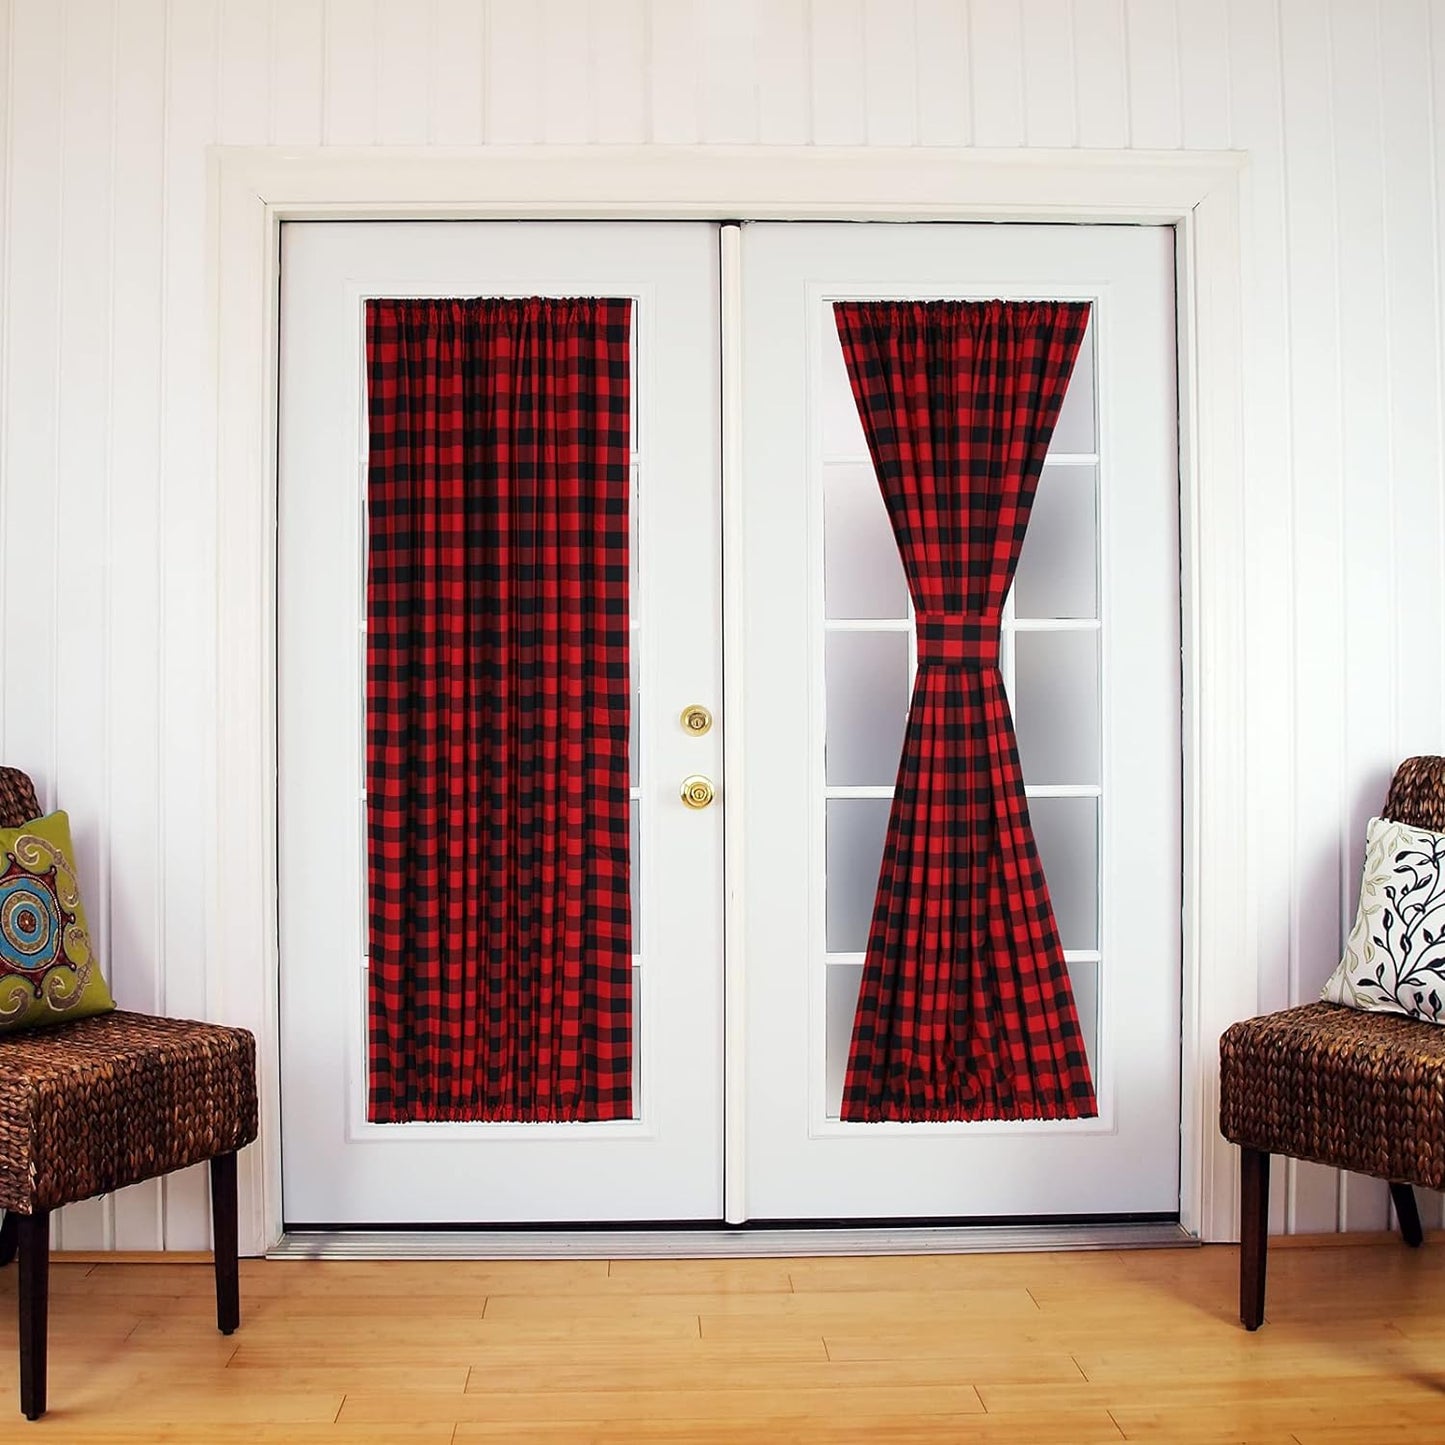 Rloncomix French Door Curtains Buffalo Plaid Window Curtains Rod Pocket Farmhouse Sidelight Curtains for Glass Door 72 Inch Long 2 Panels with Tieback, Black/White  BAIHT HOME Red/Black 54"W X 40"L | 1 Panel 